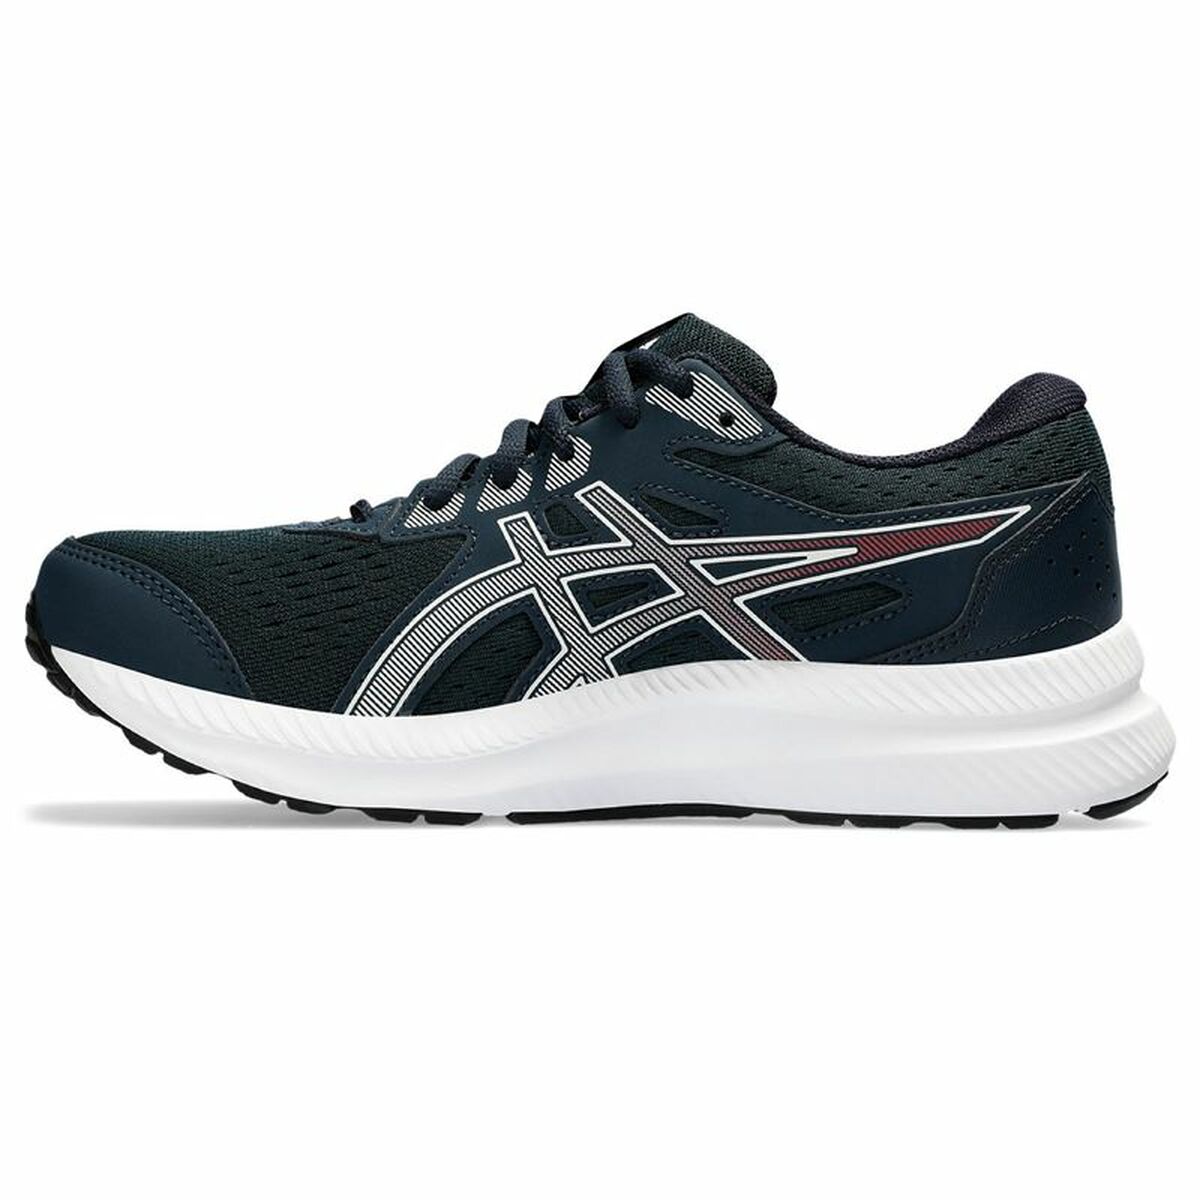 Running Shoes for Adults Asics Gel-Contend 8  Lady Blue